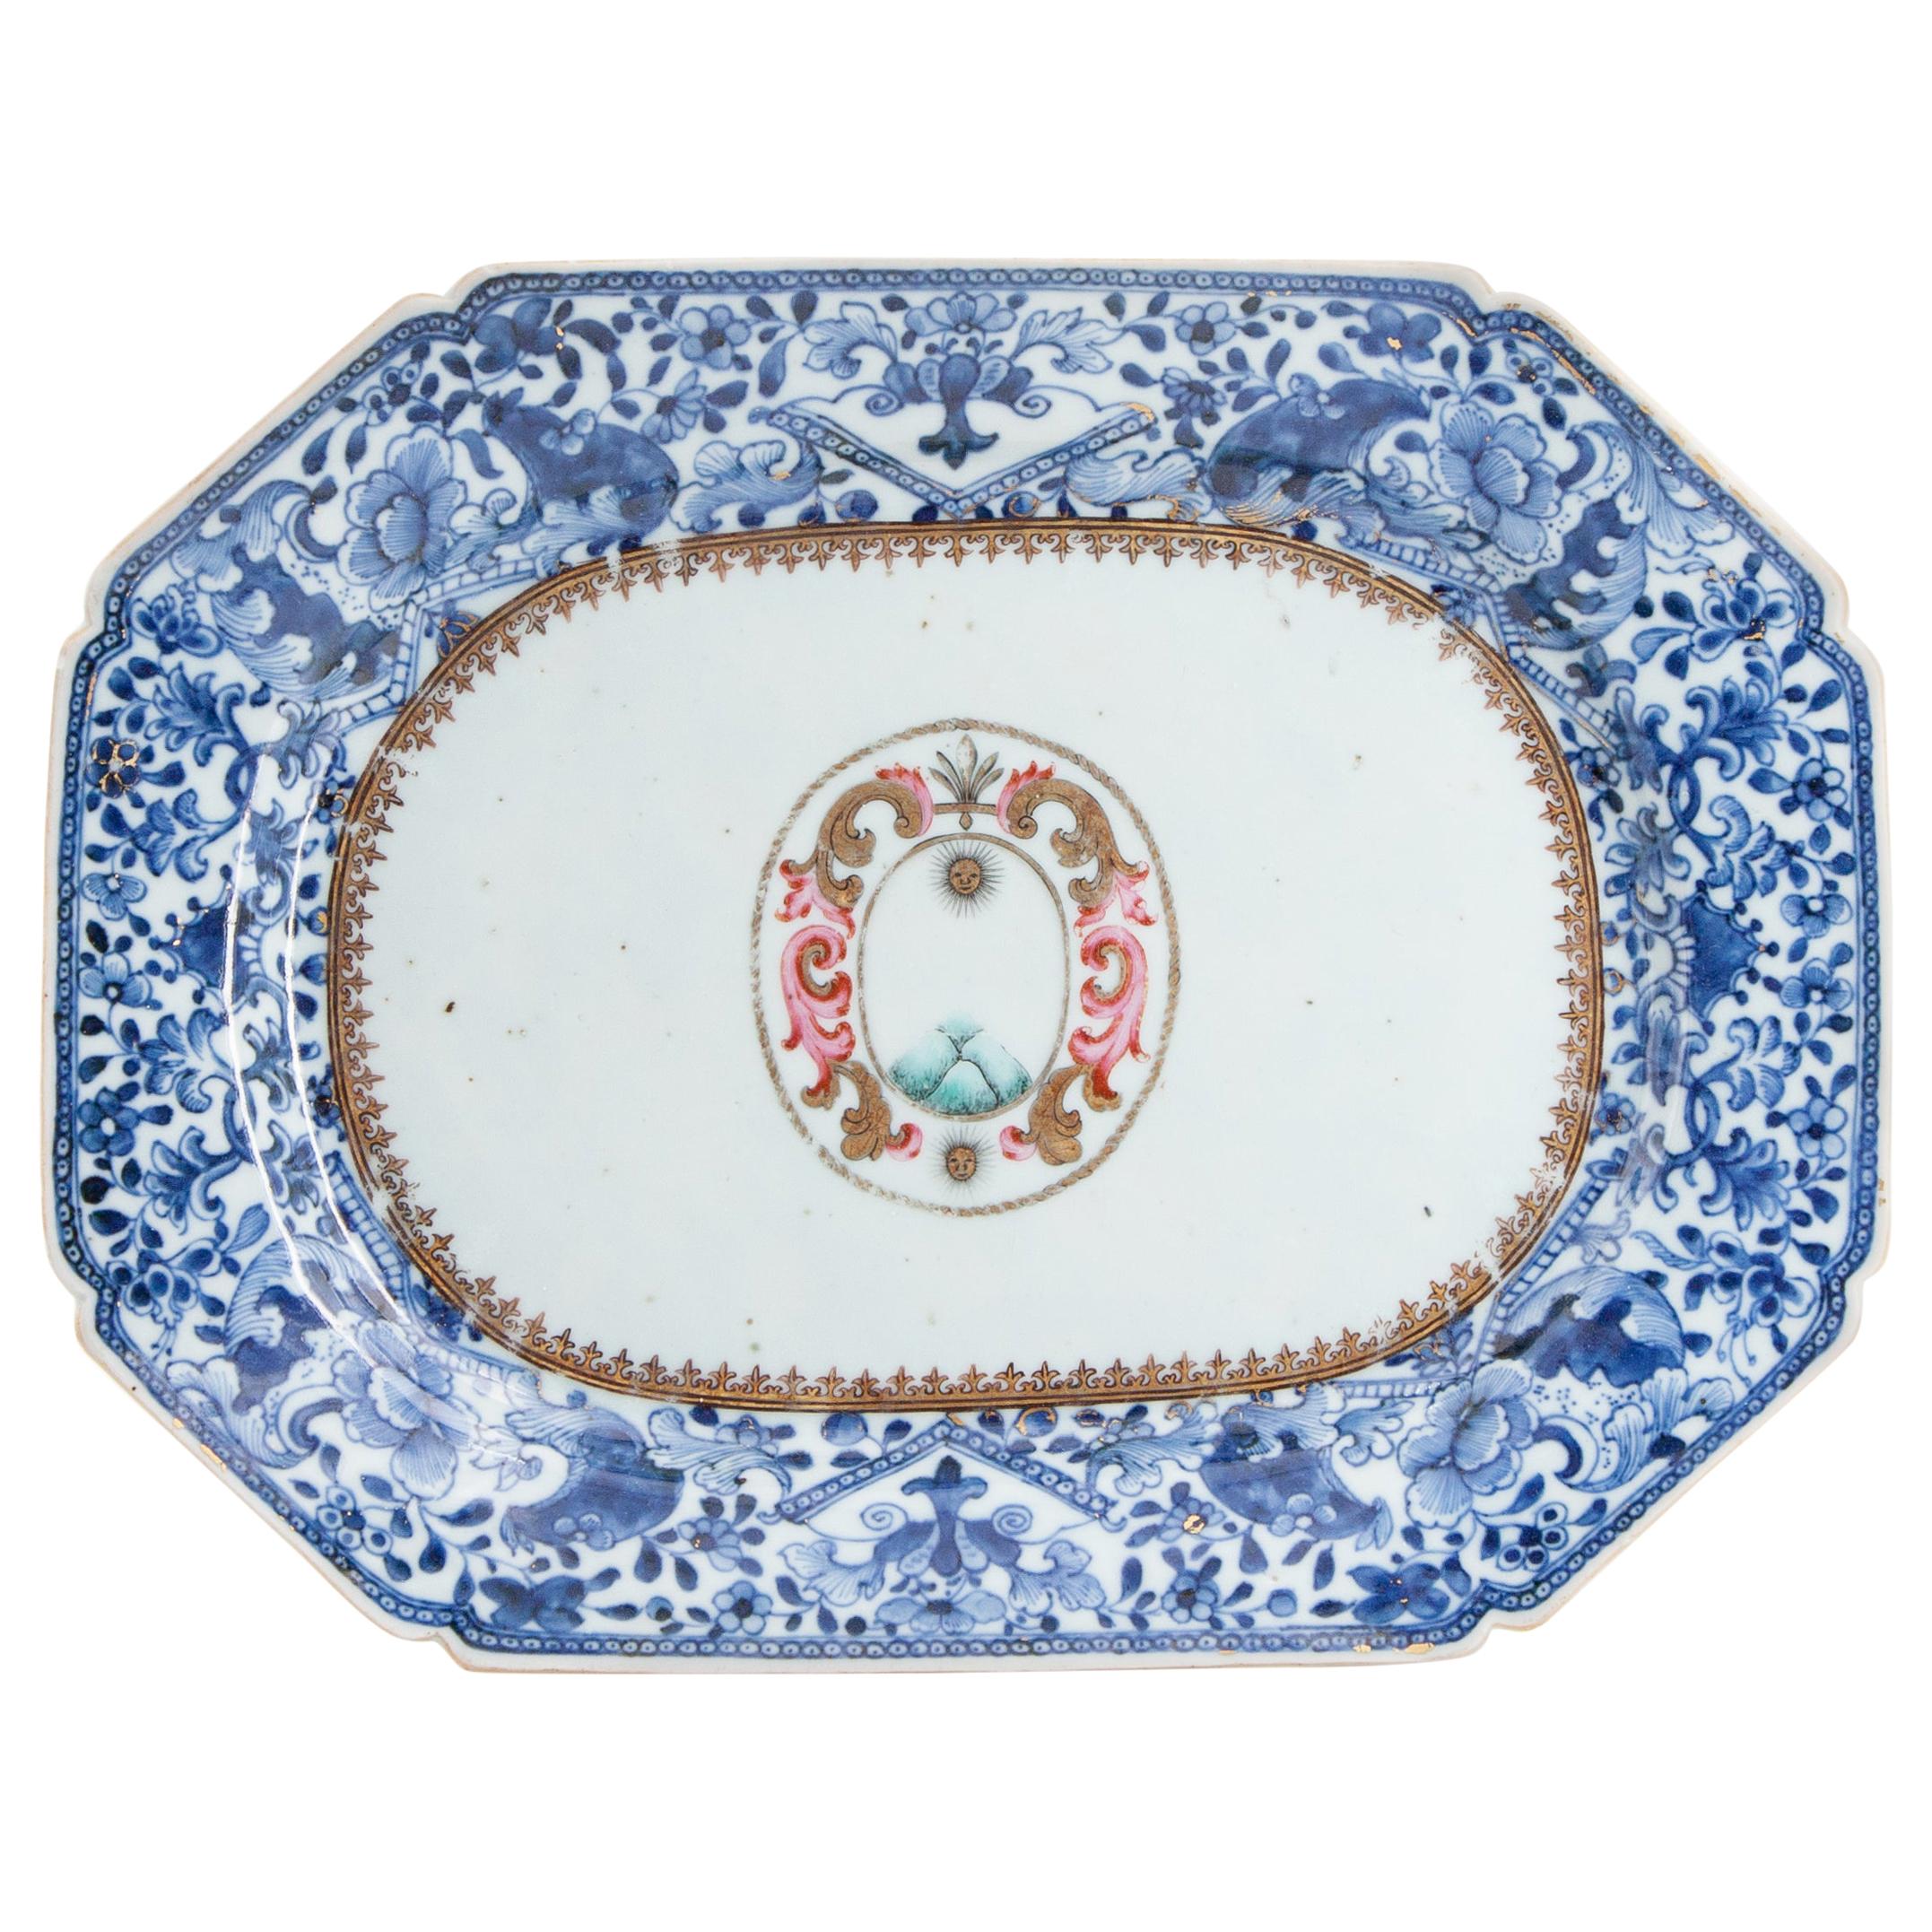 18th Century Chinese Export Porcelain Armorial Platter